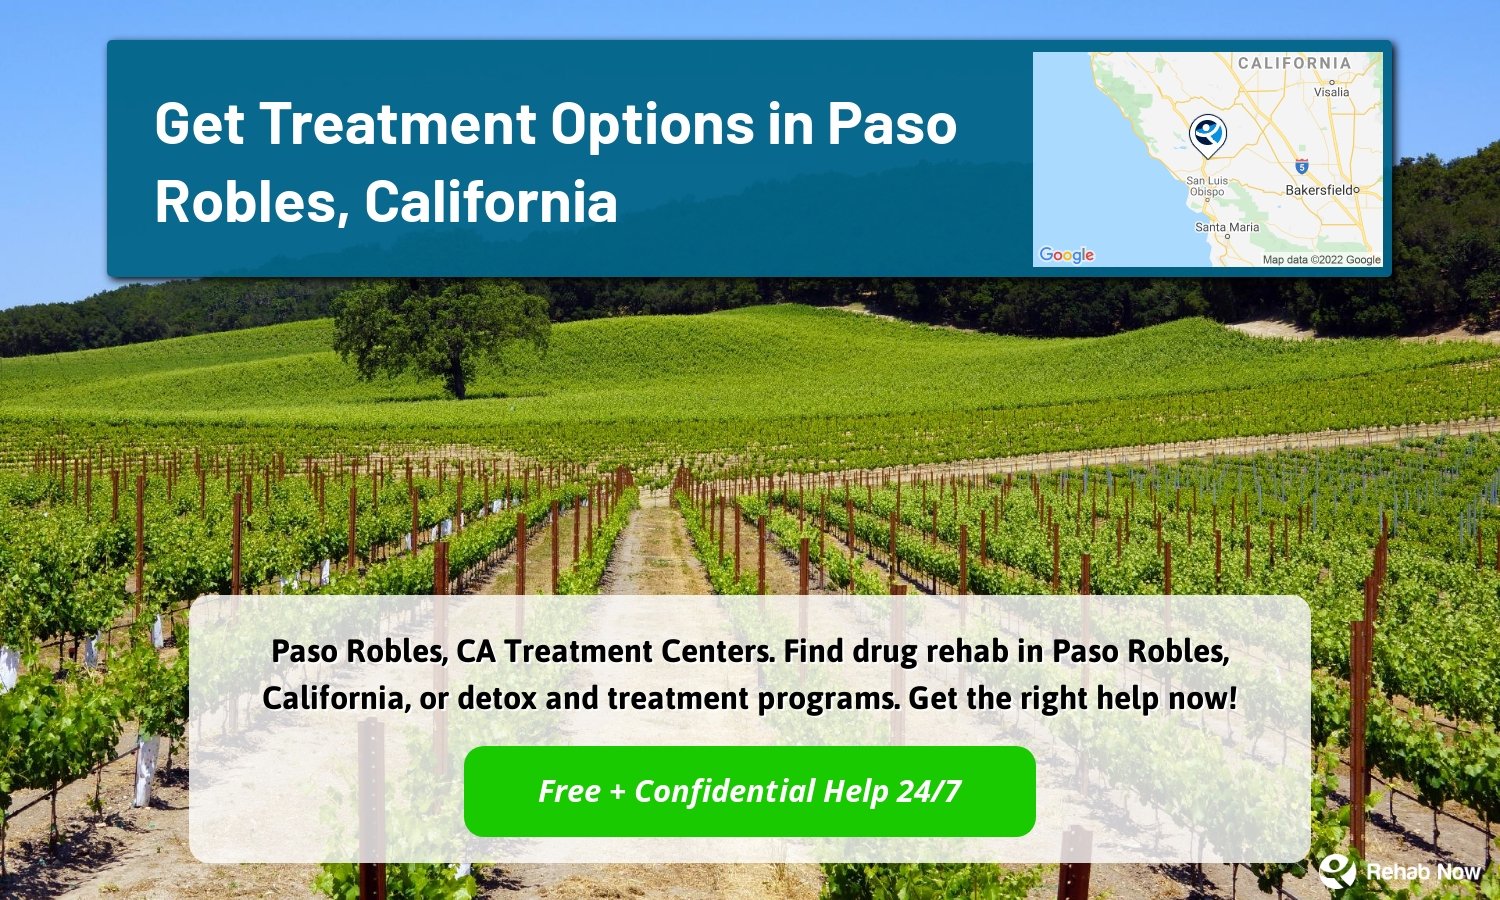 Paso Robles, CA Treatment Centers. Find drug rehab in Paso Robles, California, or detox and treatment programs. Get the right help now!